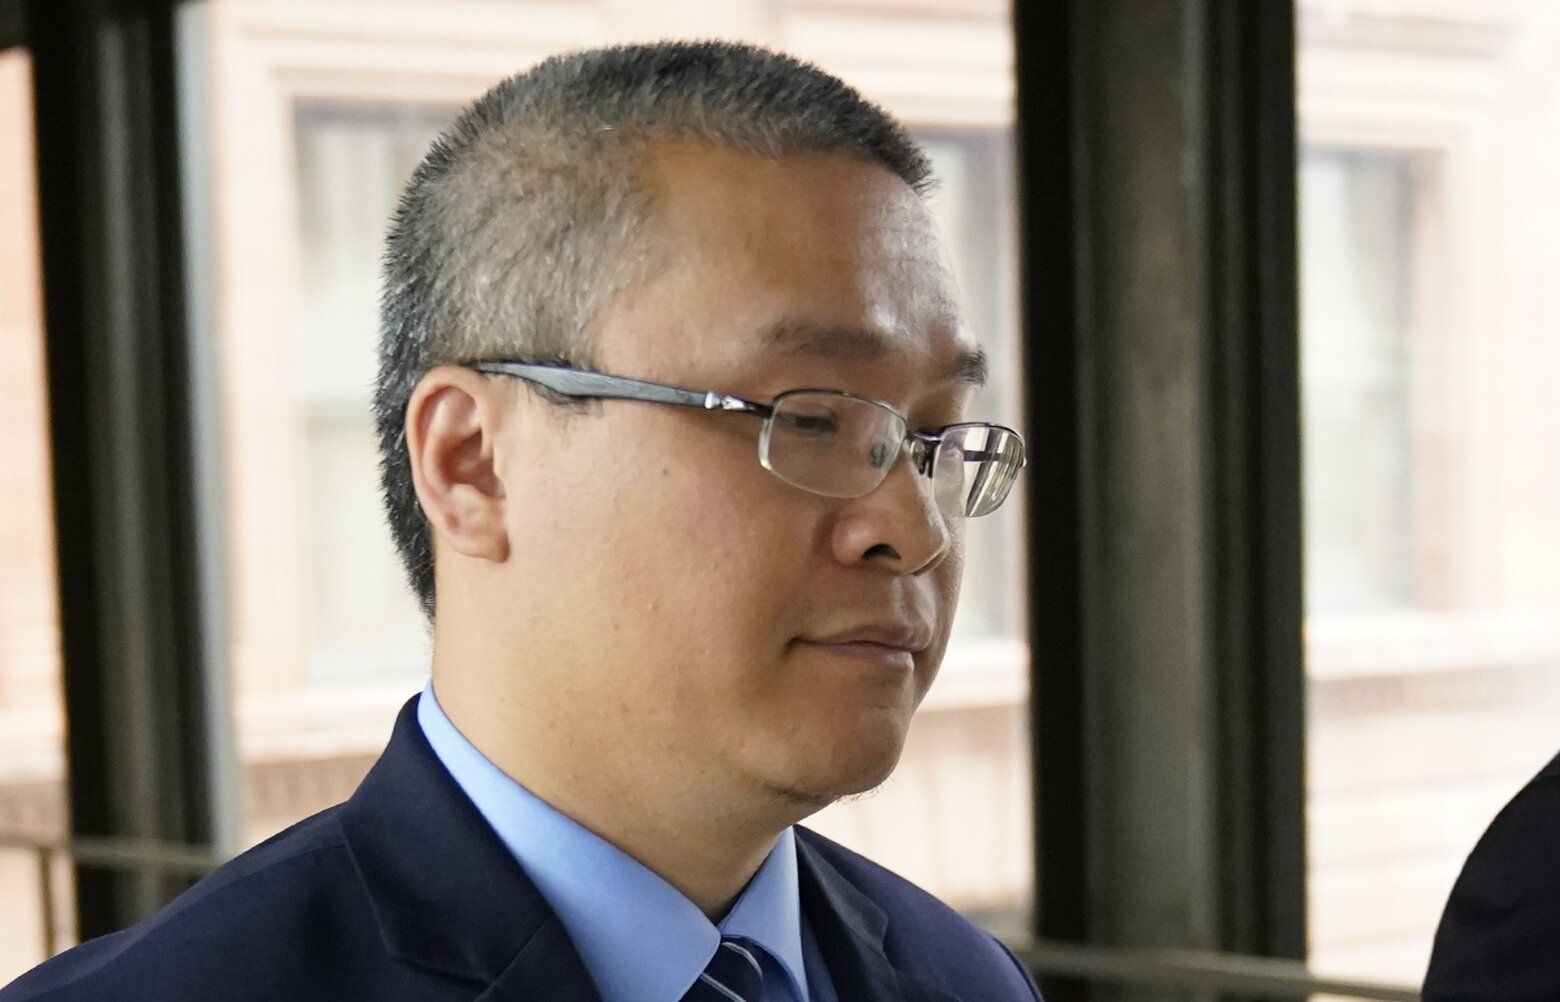 Ex-officer Thao convicted of aiding George Floyd's killing | The 